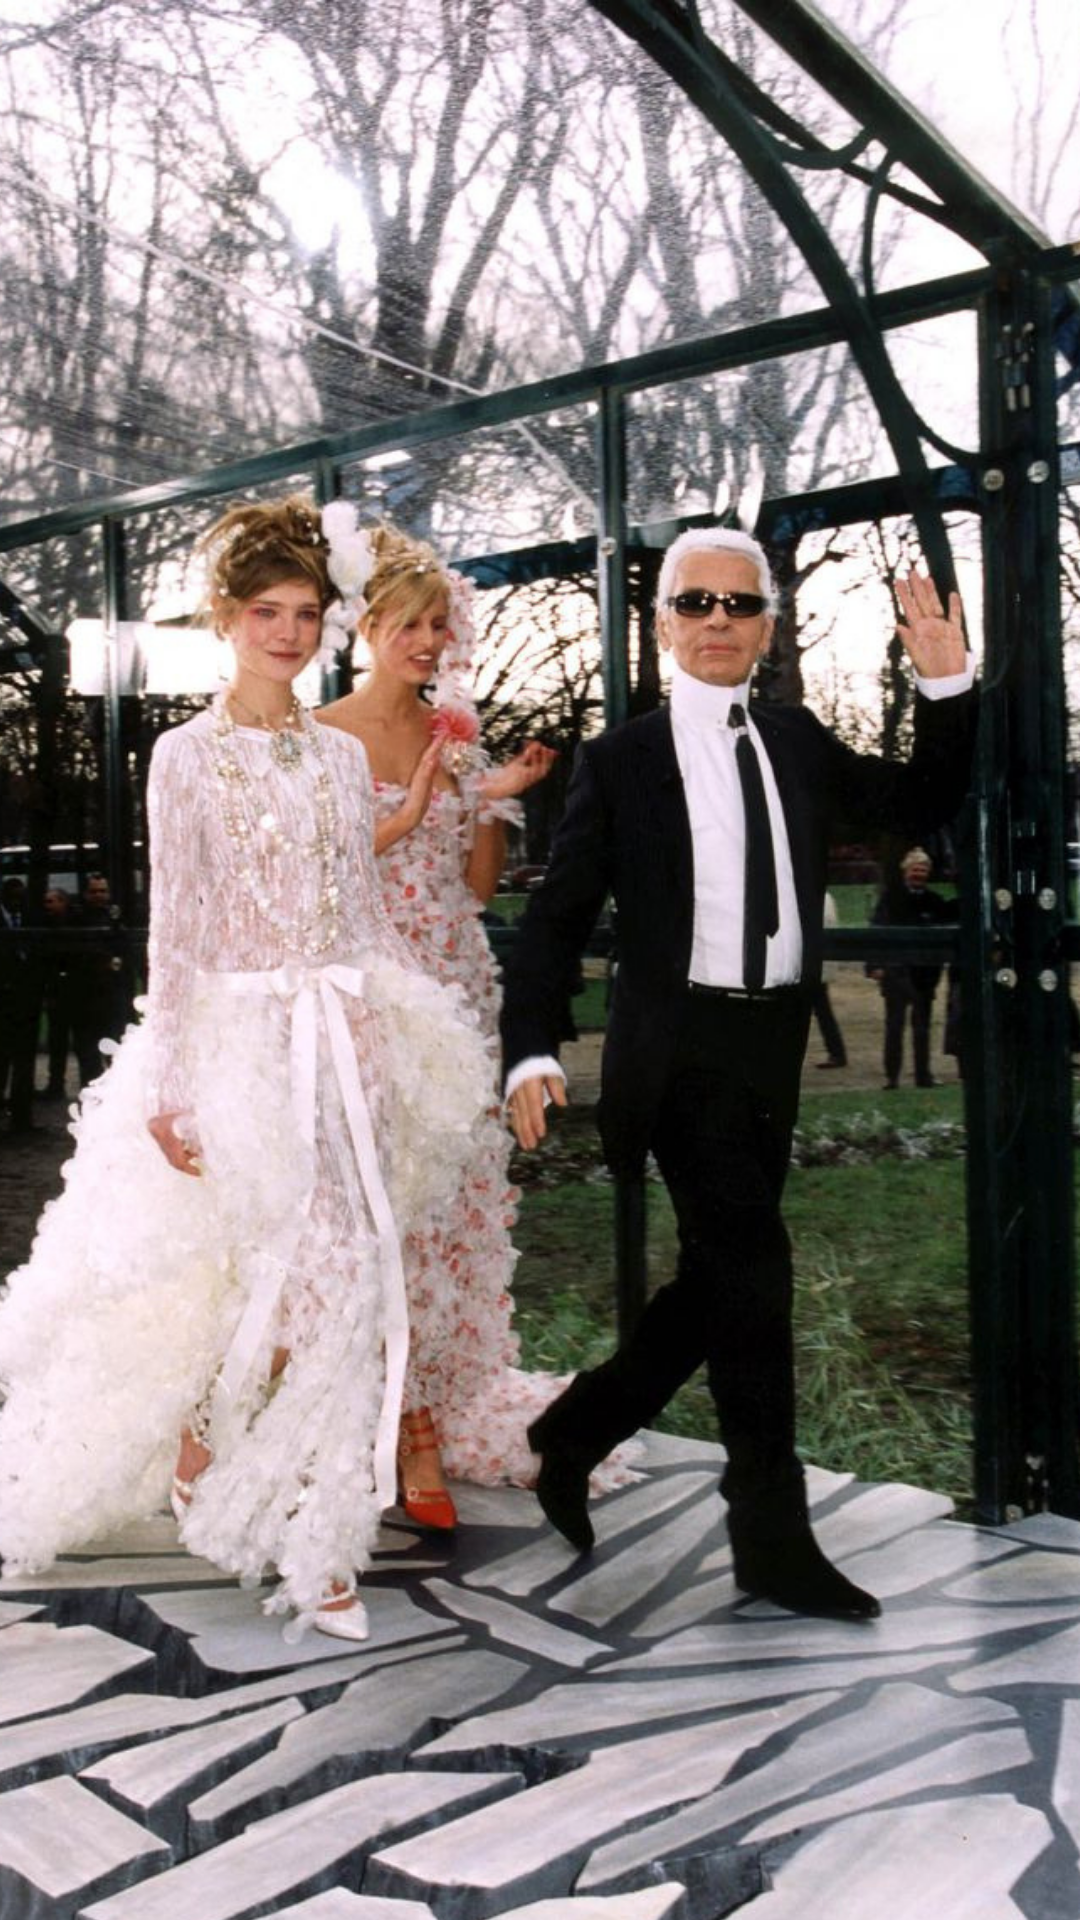 Remembering Karl Lagerfeld – Bay Area Fashionista